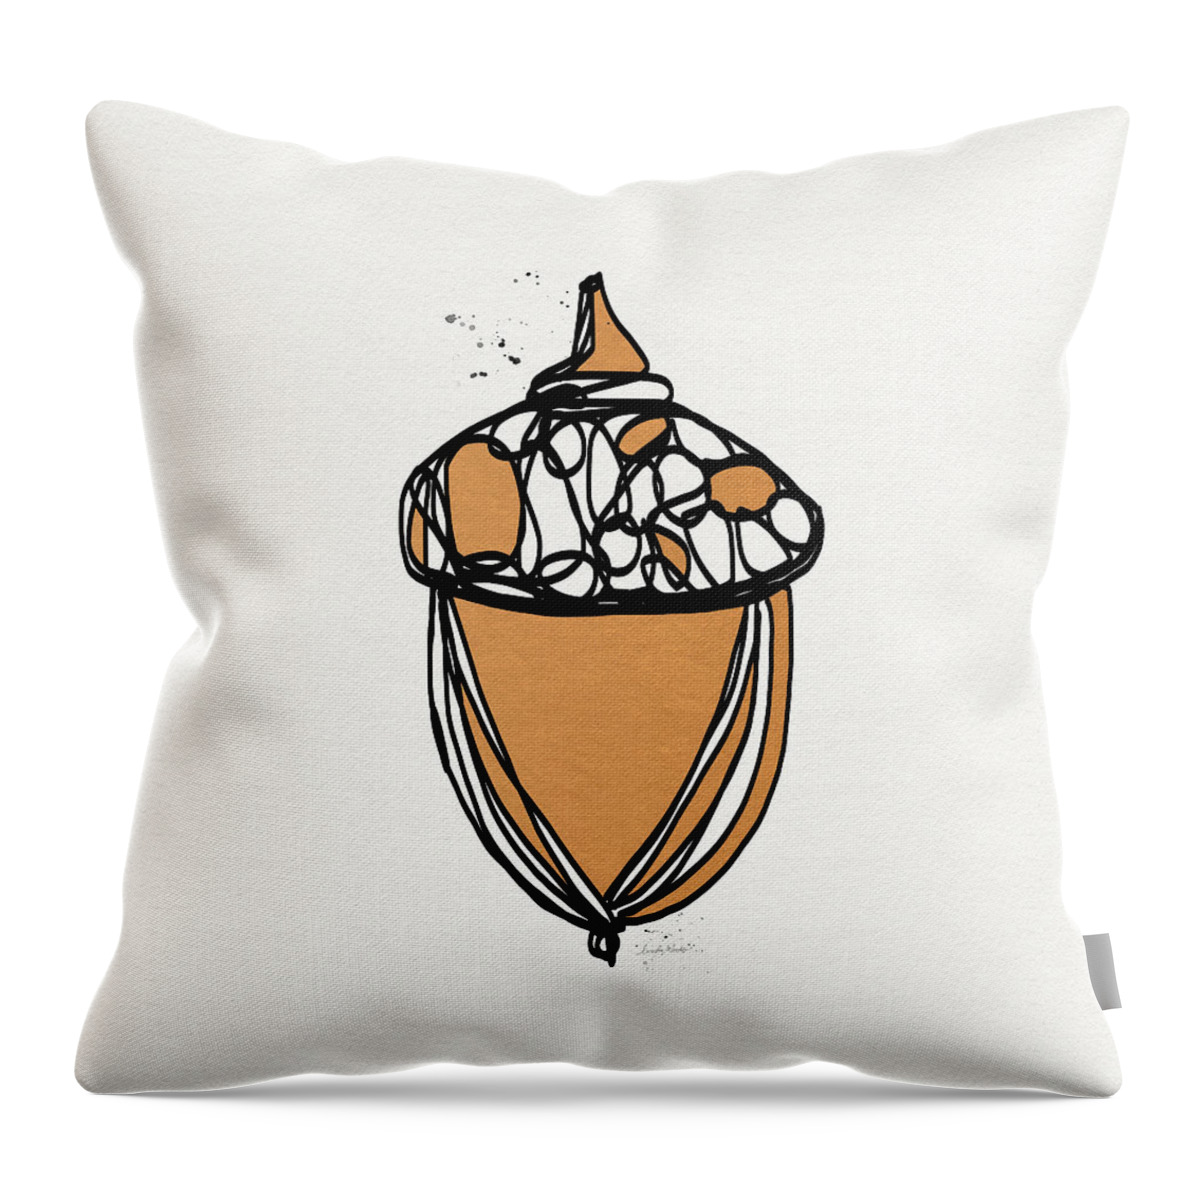 Acorn Throw Pillow featuring the mixed media Acorn- Art by Linda Woods by Linda Woods